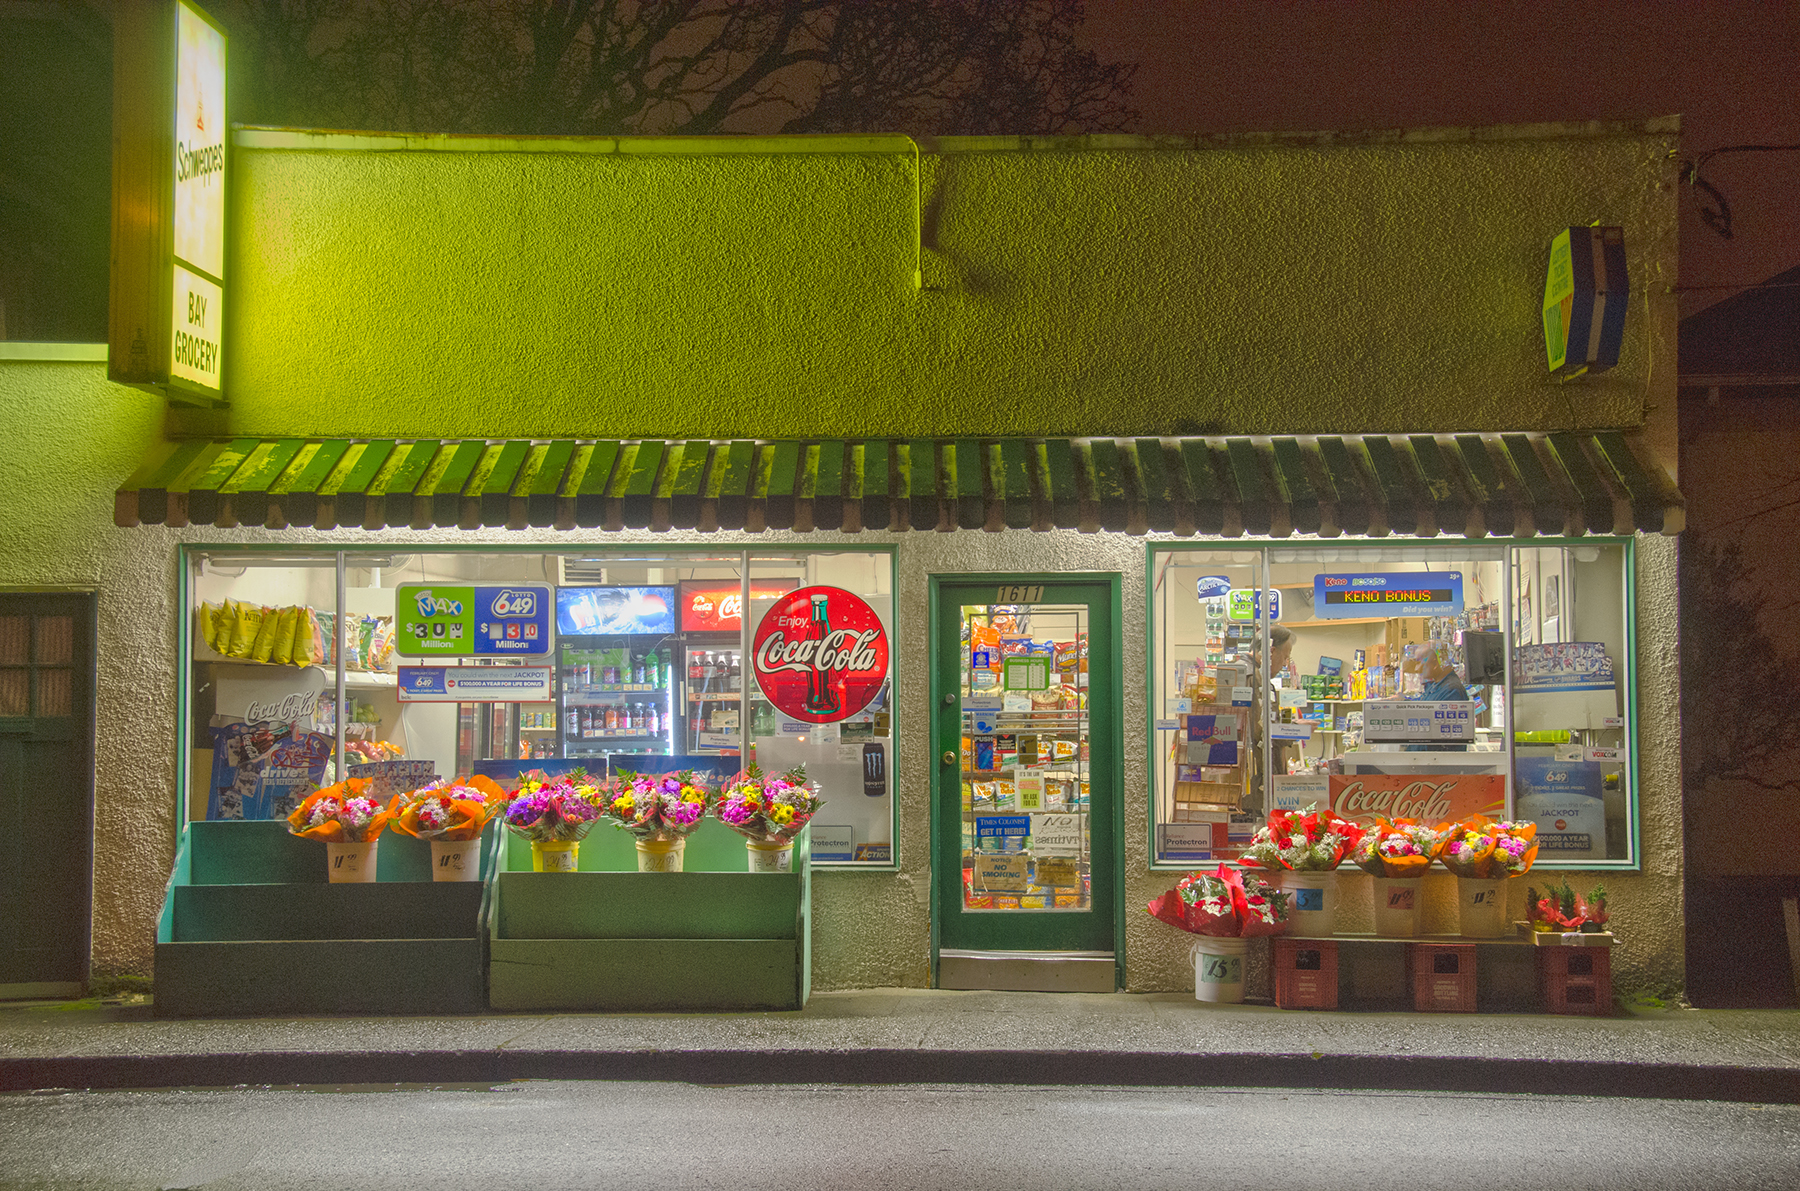 One from my series of small corner stores in Victoria, BC